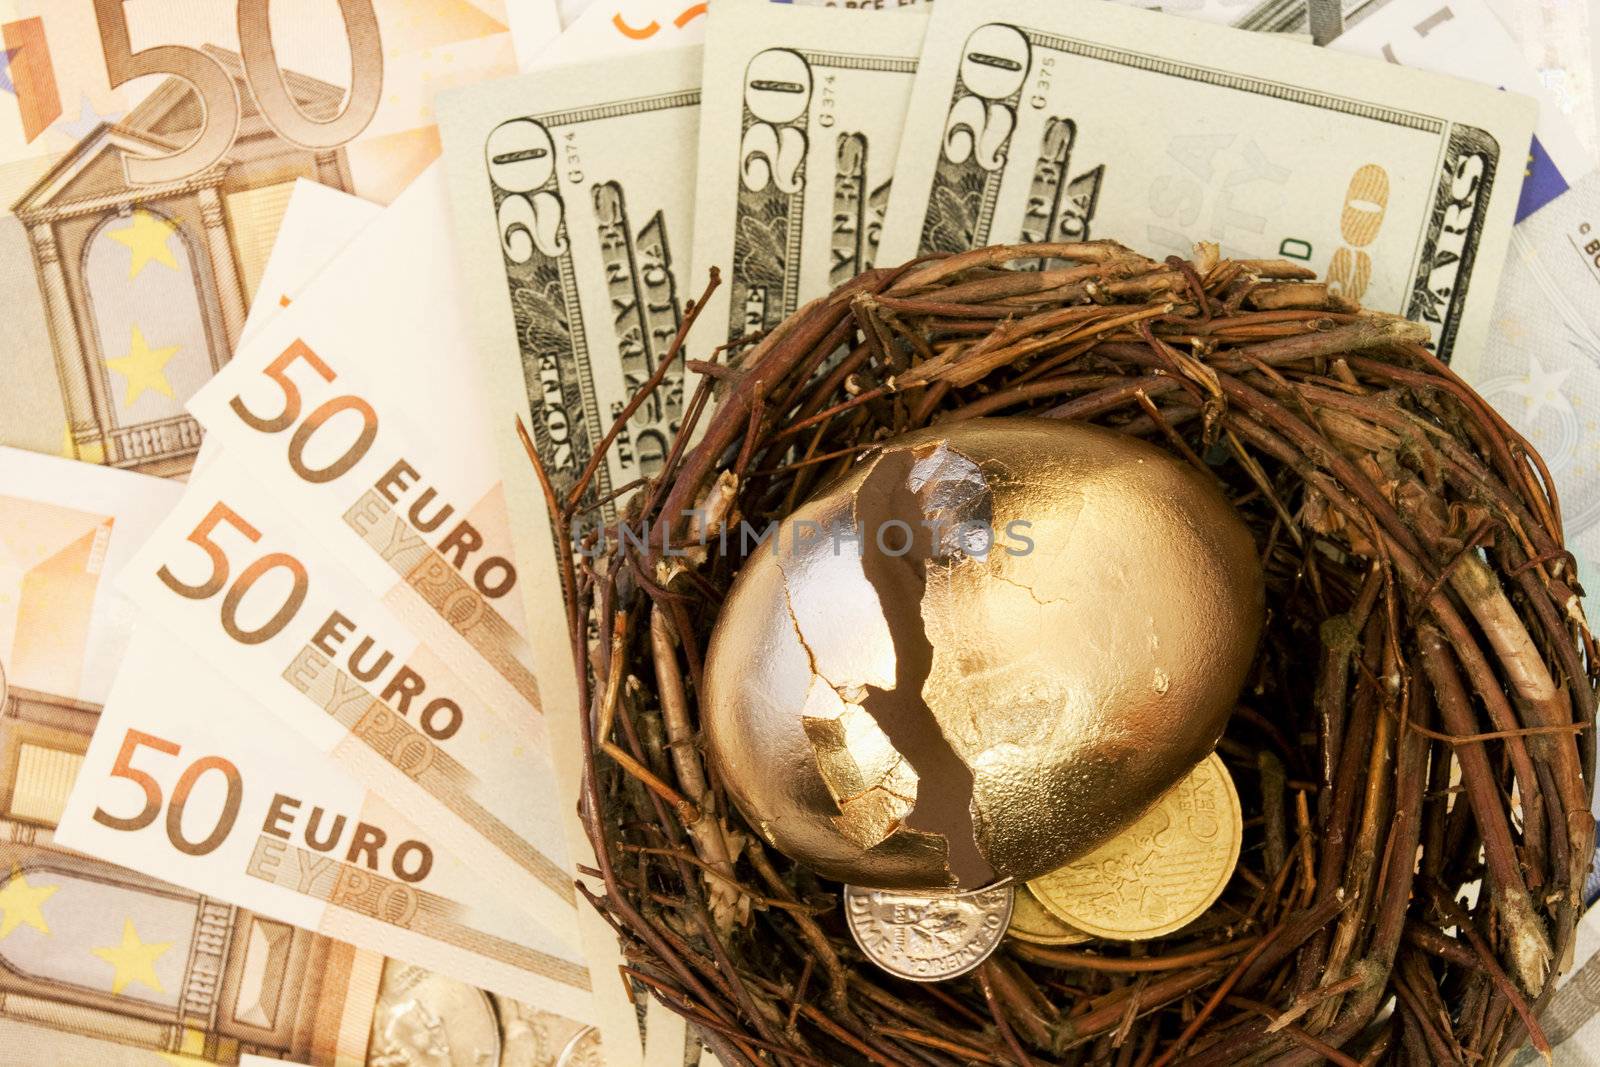 Cracked golden egg on European Union and American currencies reflected the damaged value of investments on both sides of the Atlantic